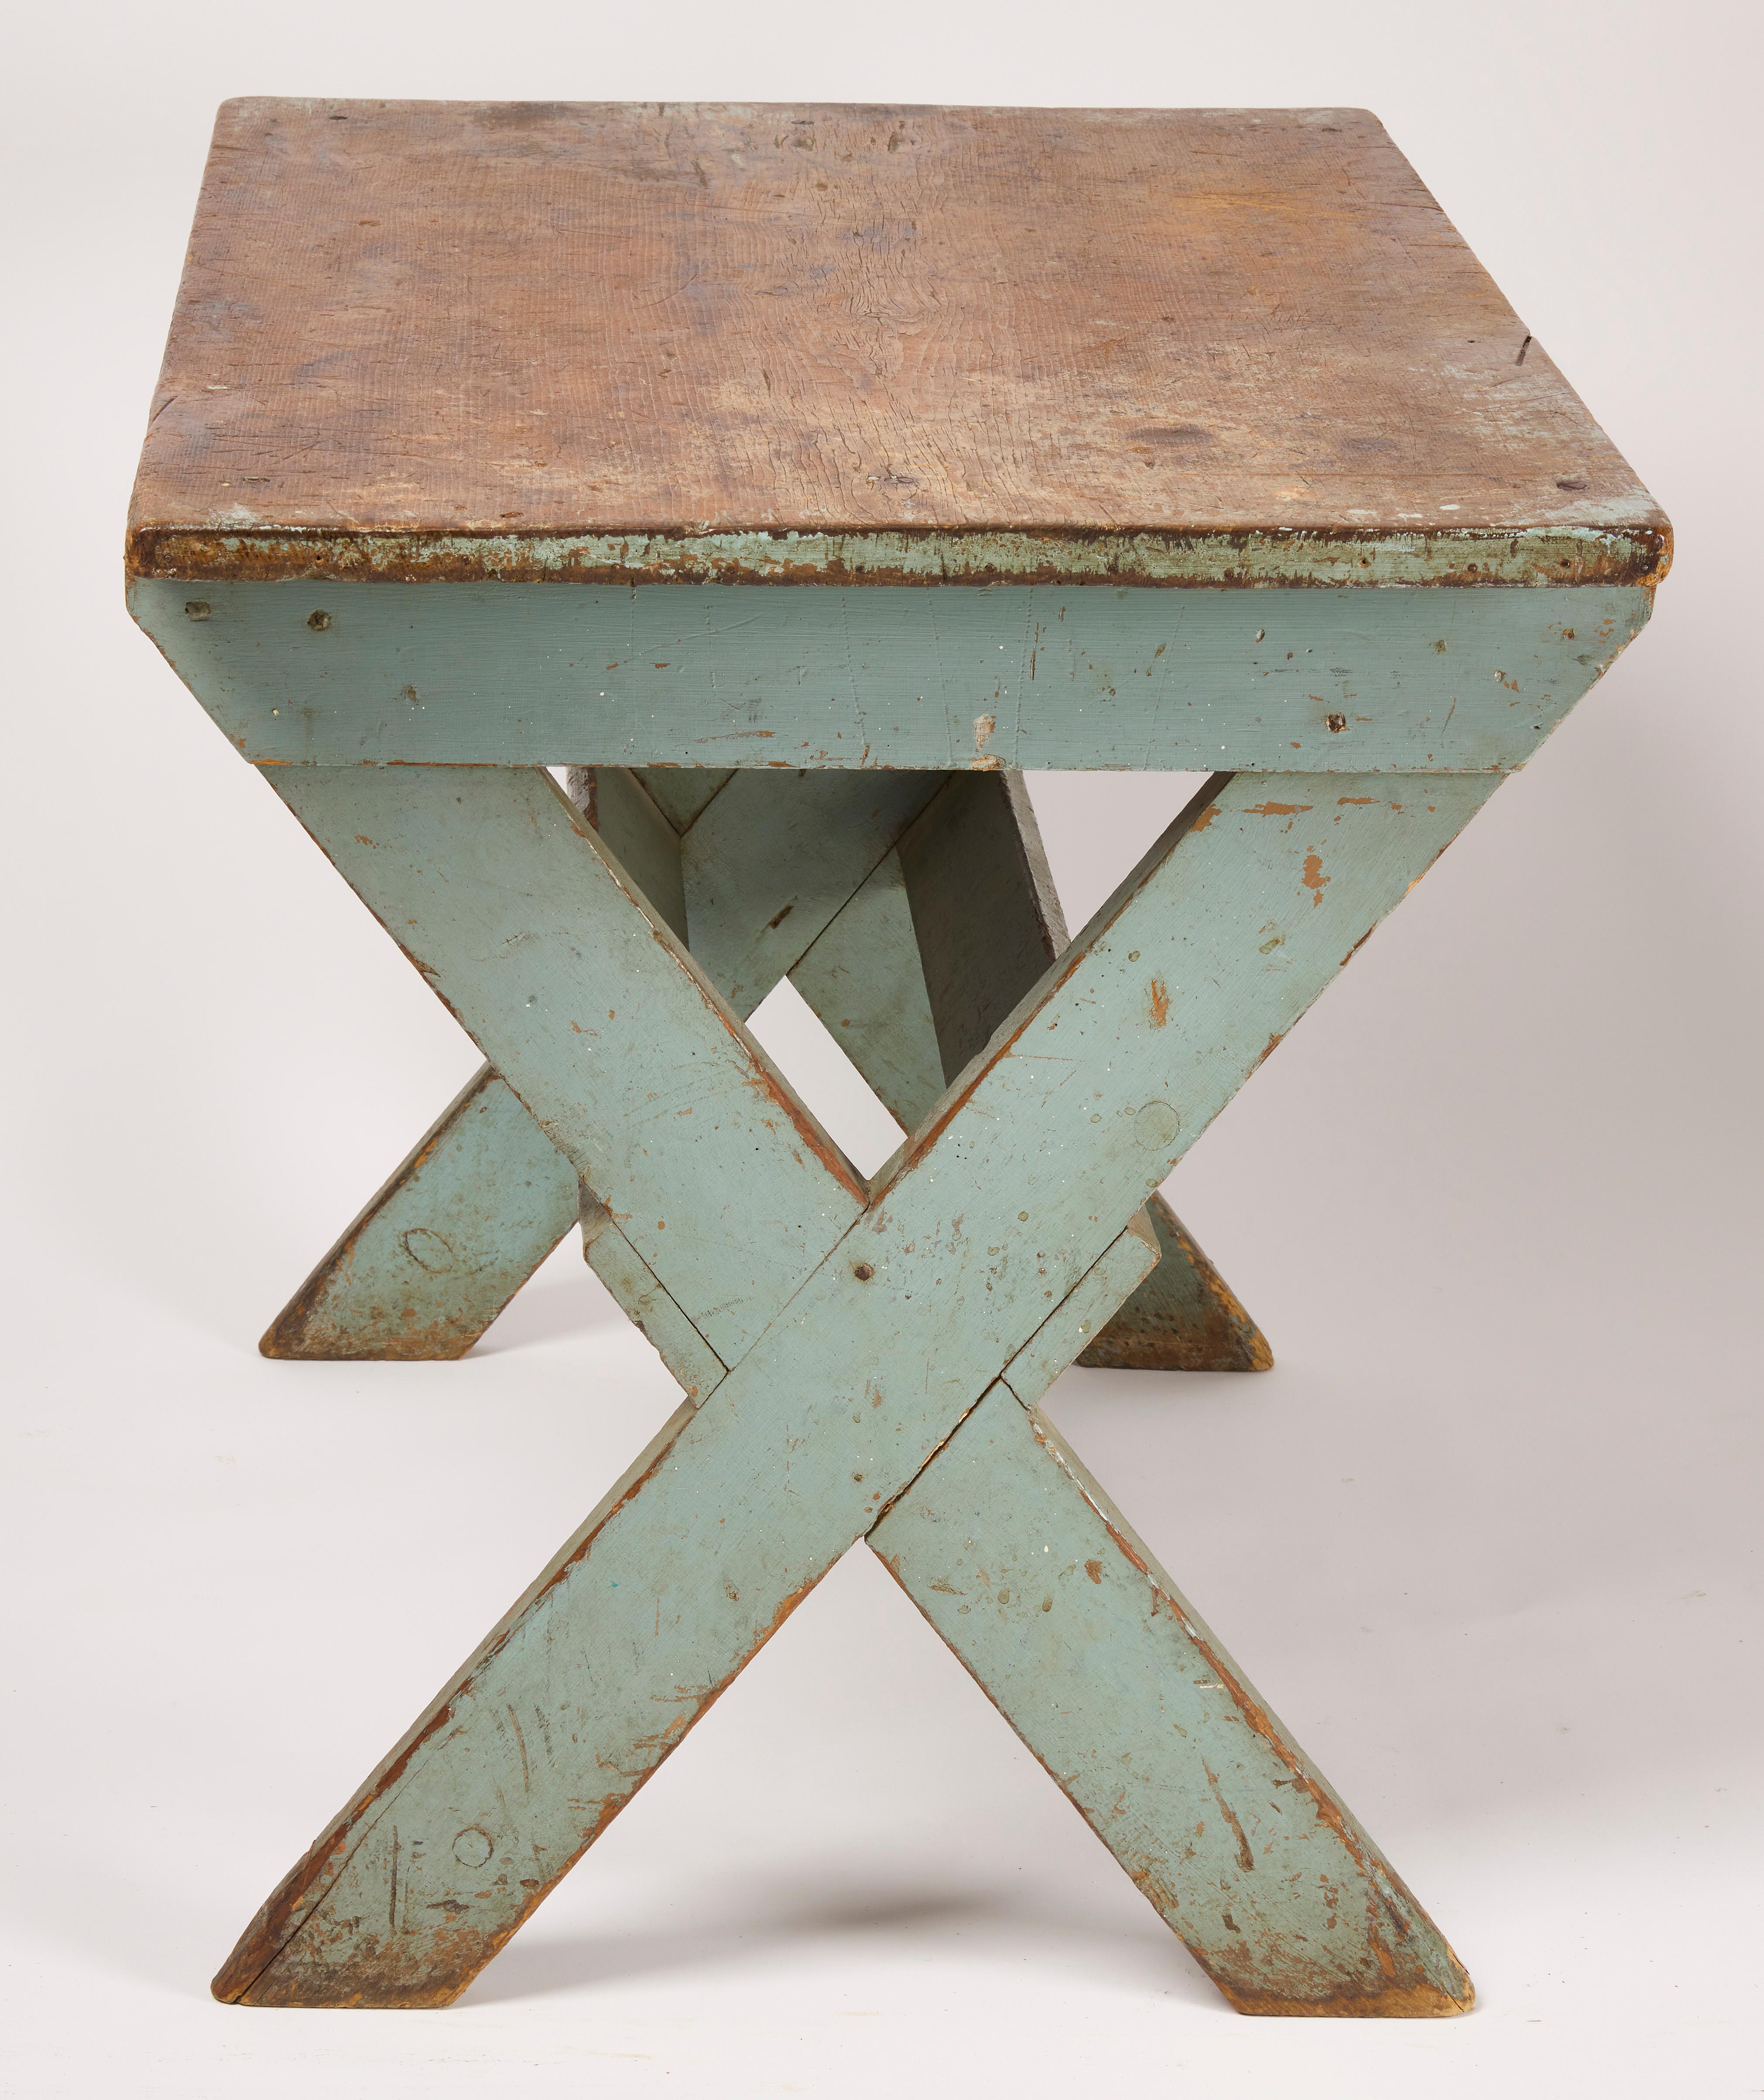 Painted Early 19th Century New England Sawbuck Country Table in Celadon Green Paint